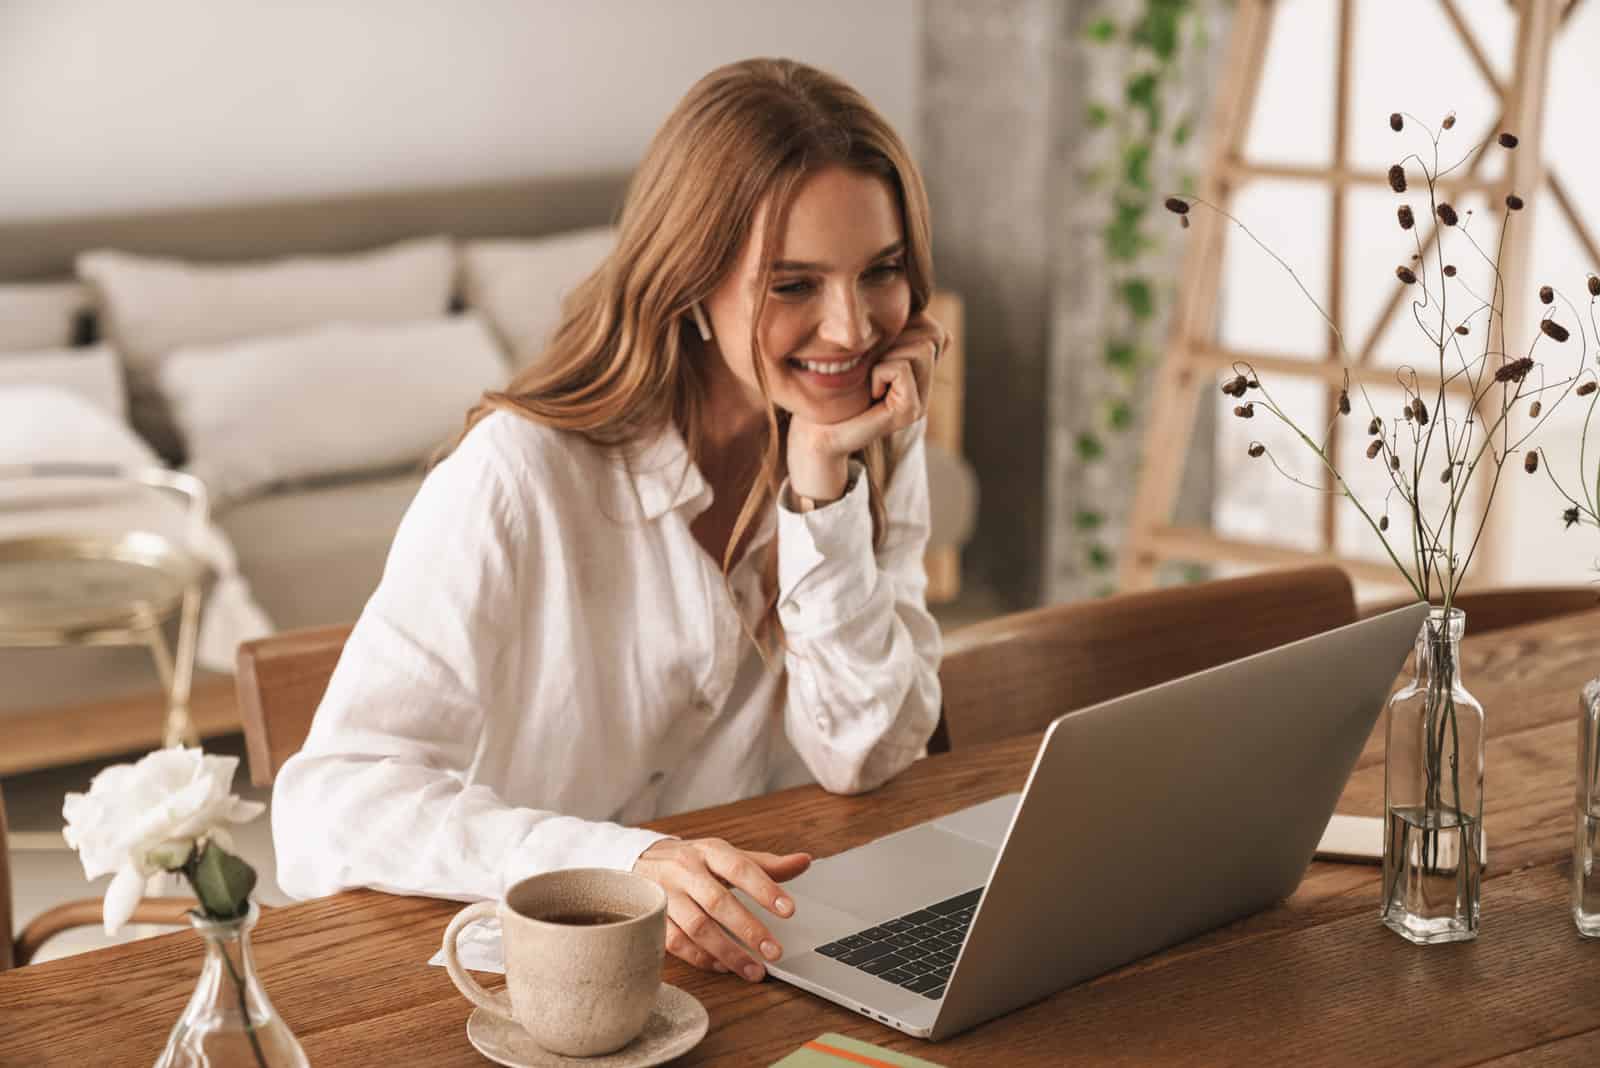 a smiling woman with long brown hair is sitting behind a laptop